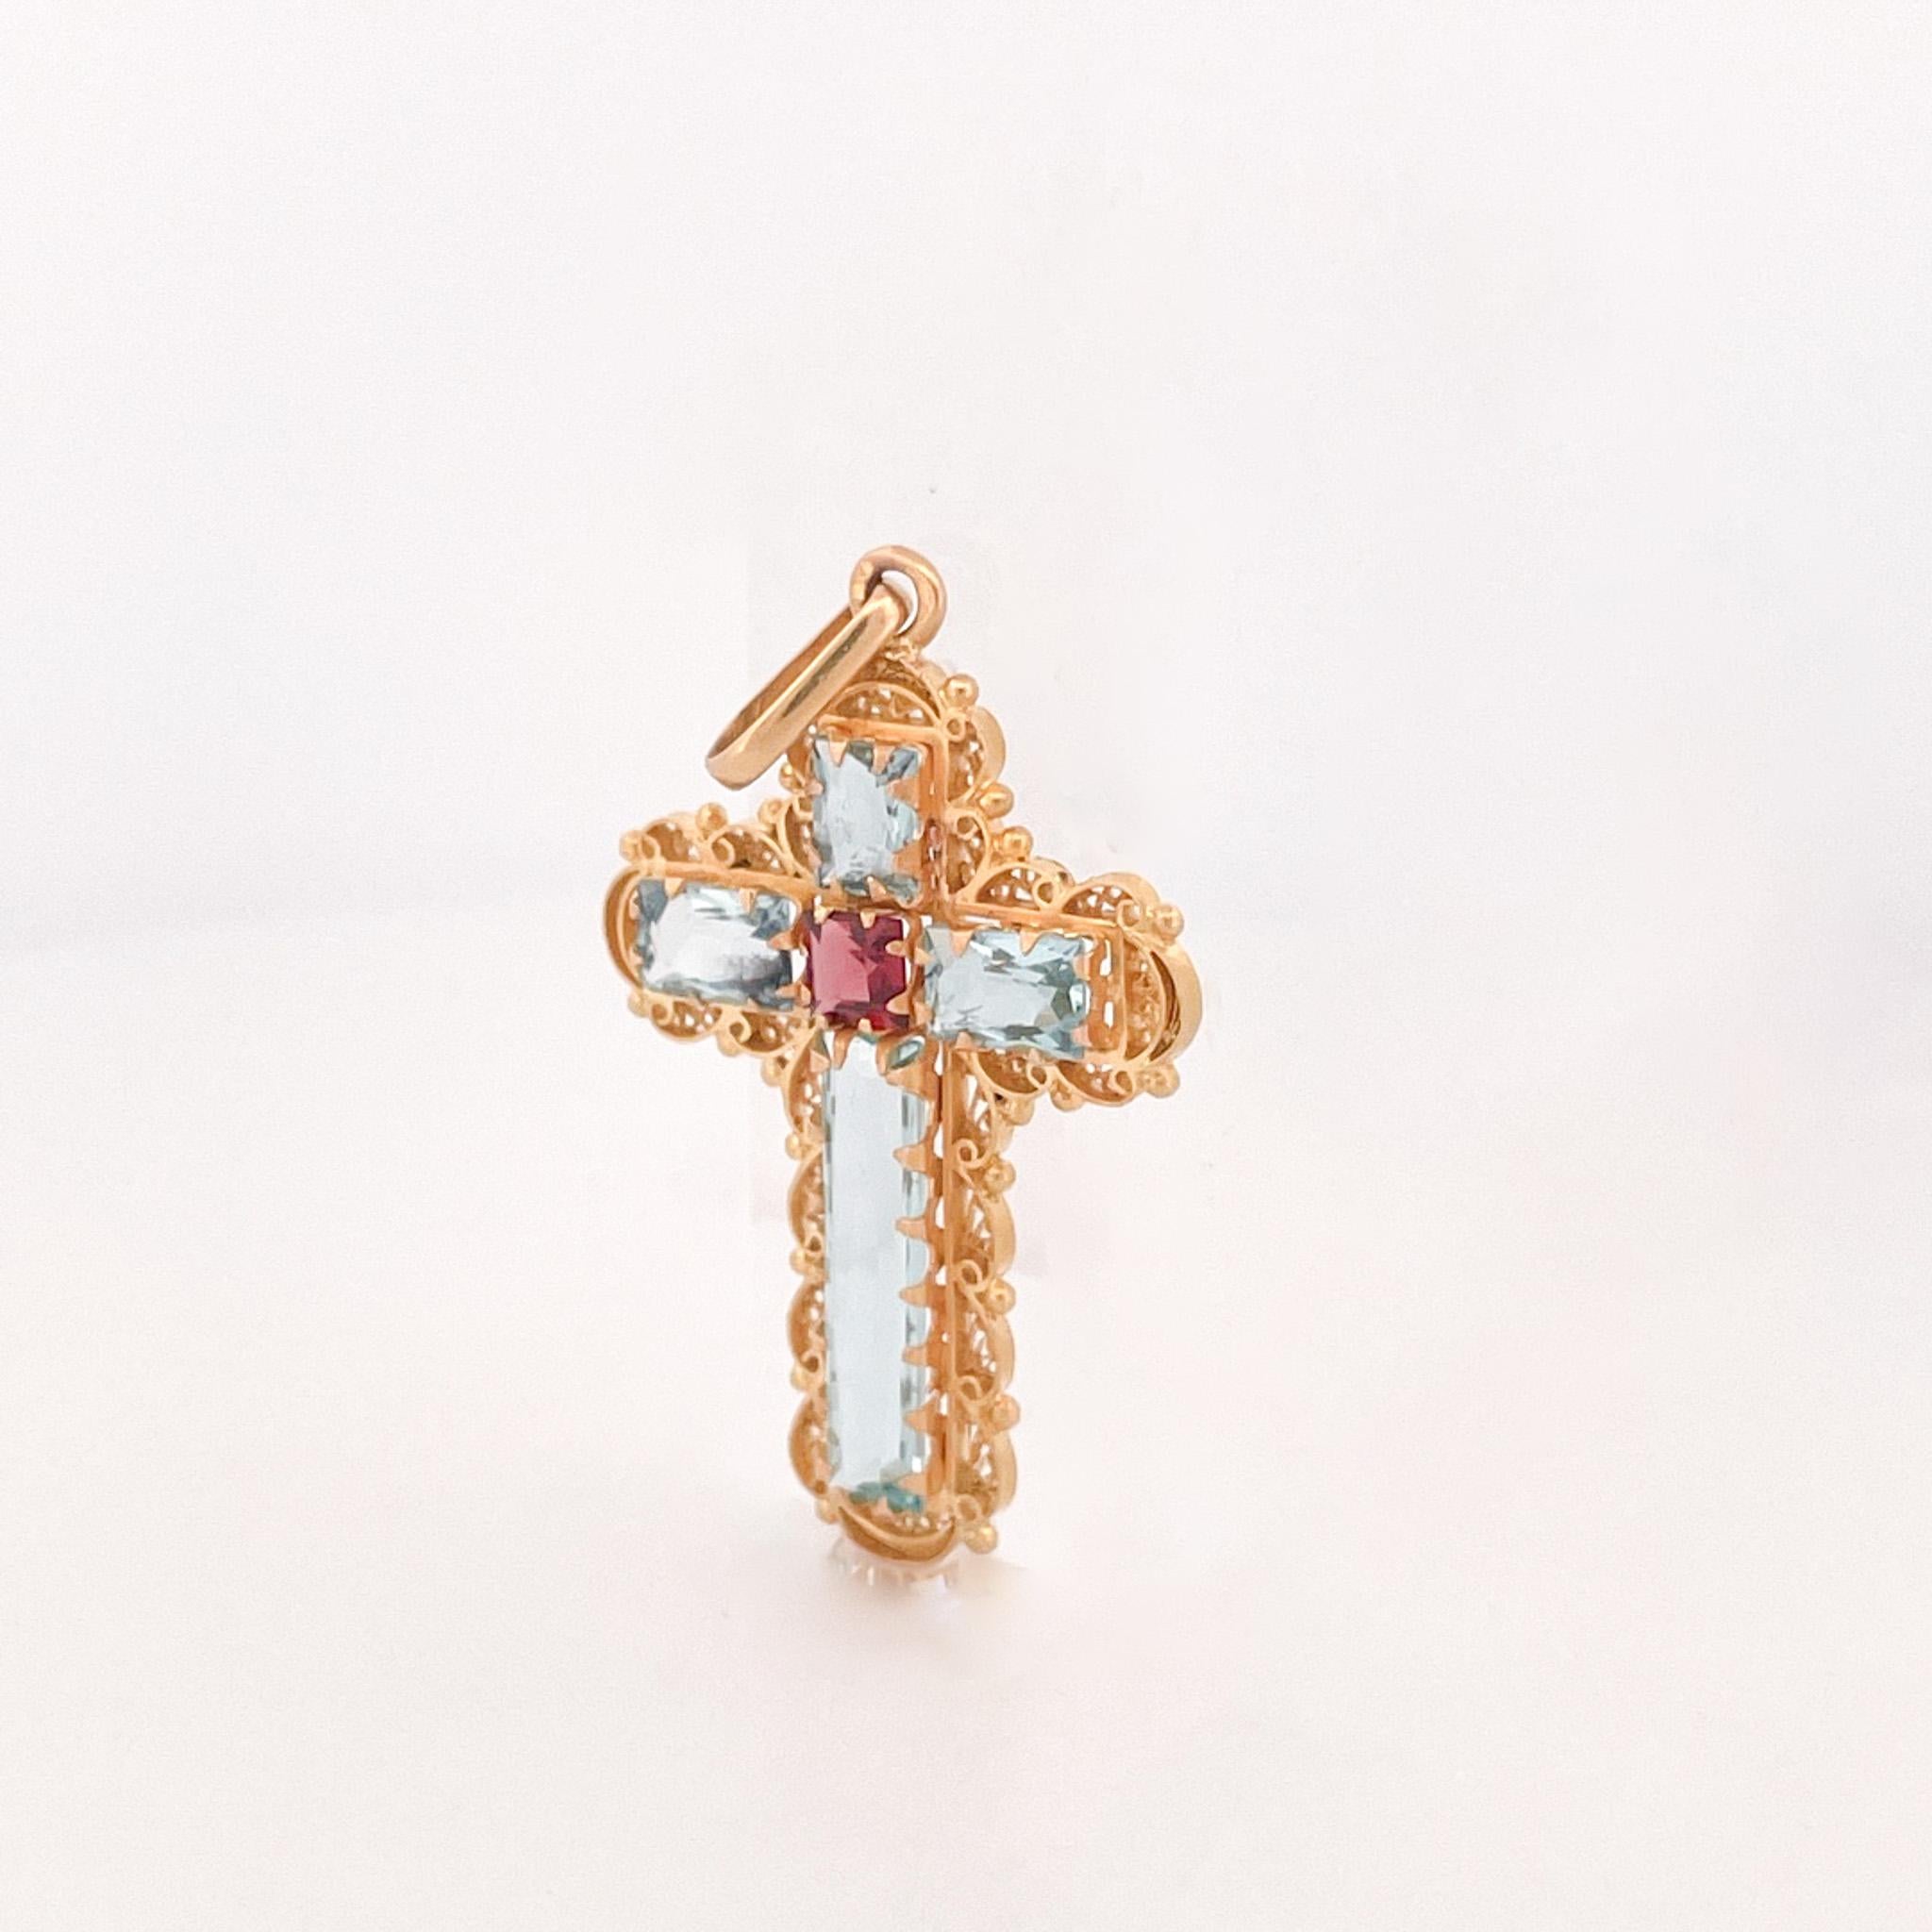 From the Eiseman Estate Jewelry Collection, yellow gold aquamarine antique cross pendant. This pendant is crafted with 4 aquamarine stones accented by yellow gold scroll work. This pendant measures 2 inches in length and features a single bail. This